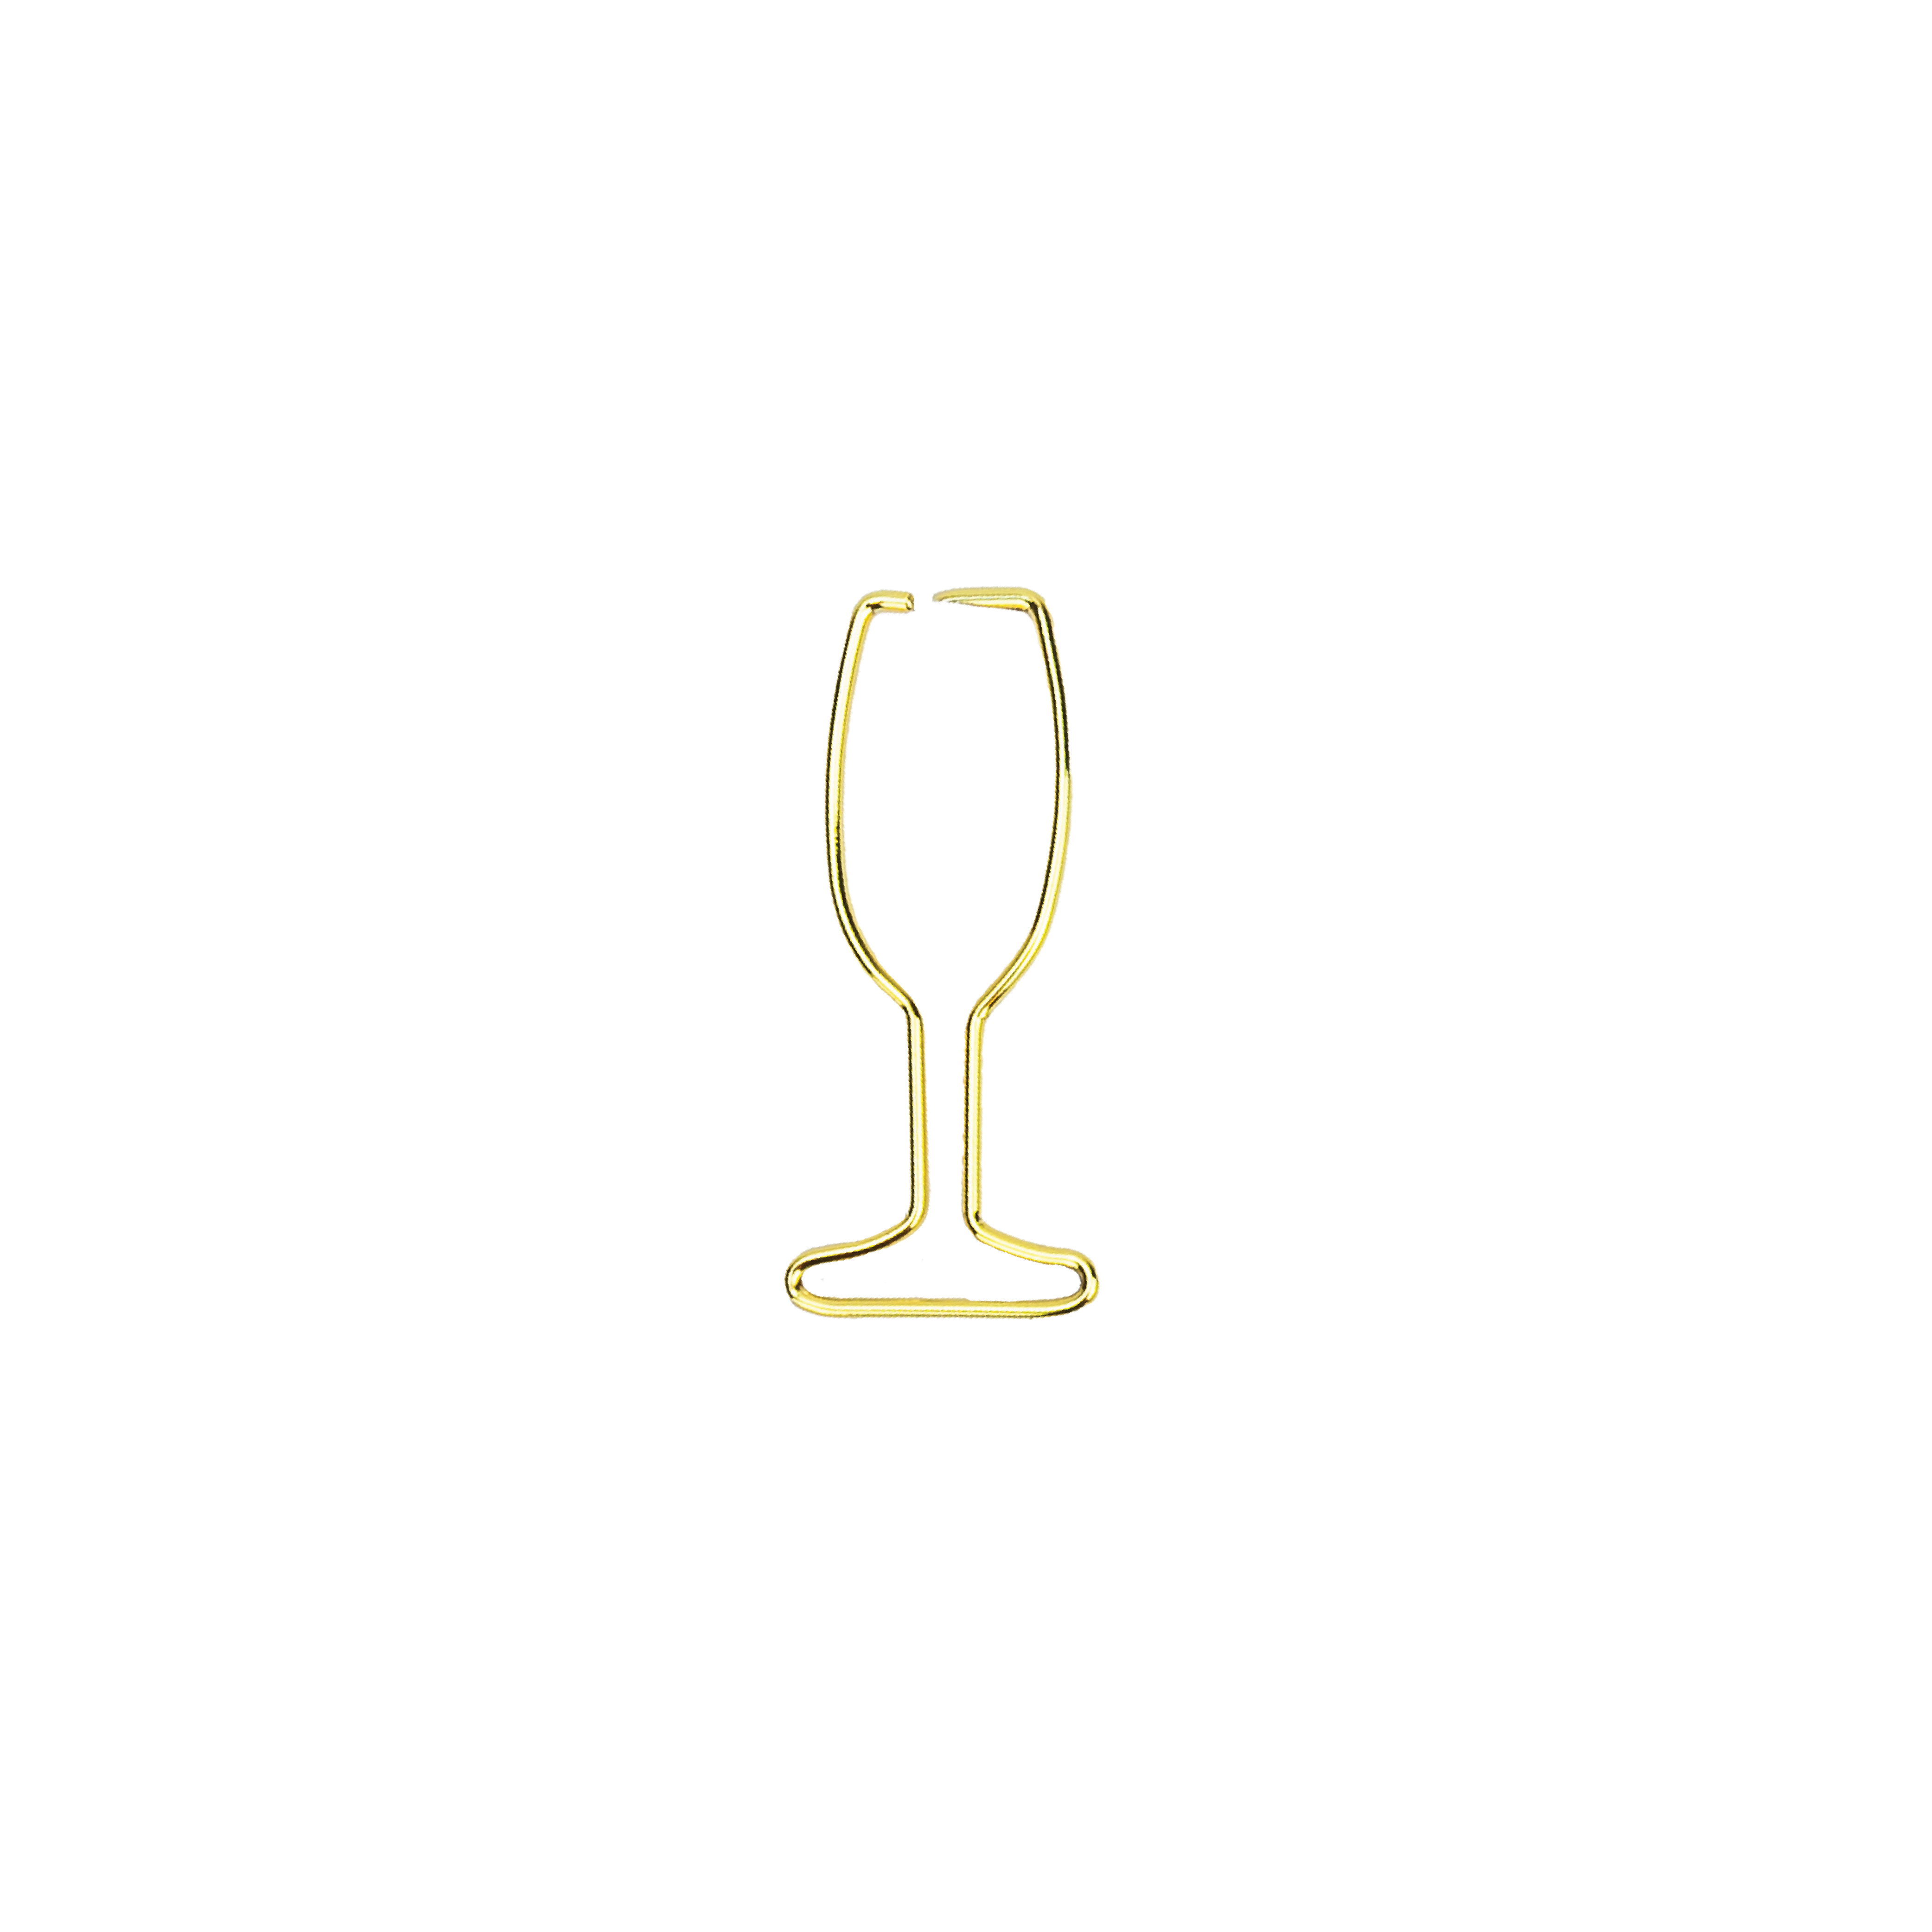 Champagne Flute - 25 Gold Paperclips